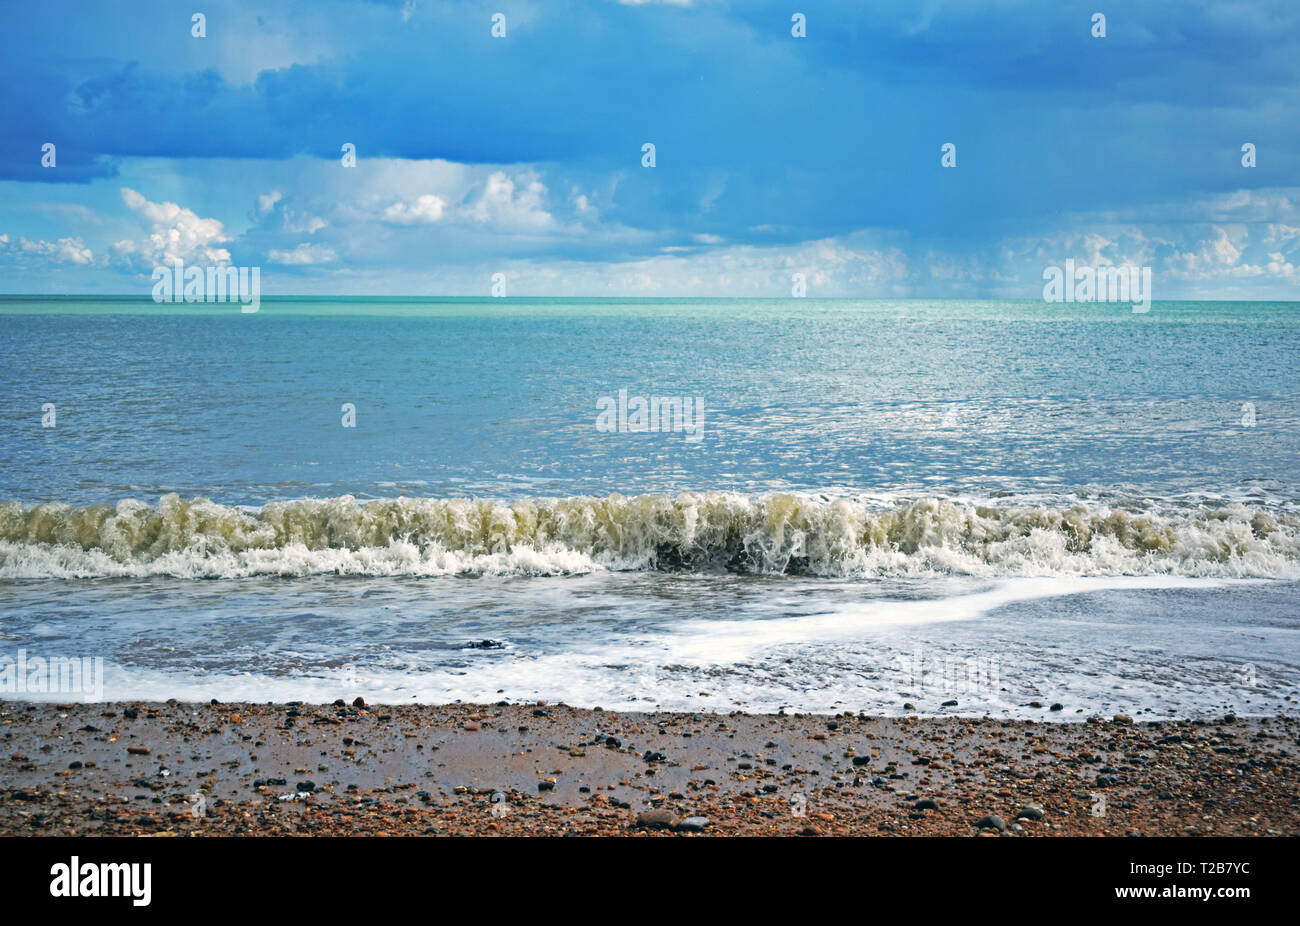 Sea scene with the waves coming up onto the pebble beach with a dramatic cloudy sky background Stock Photo